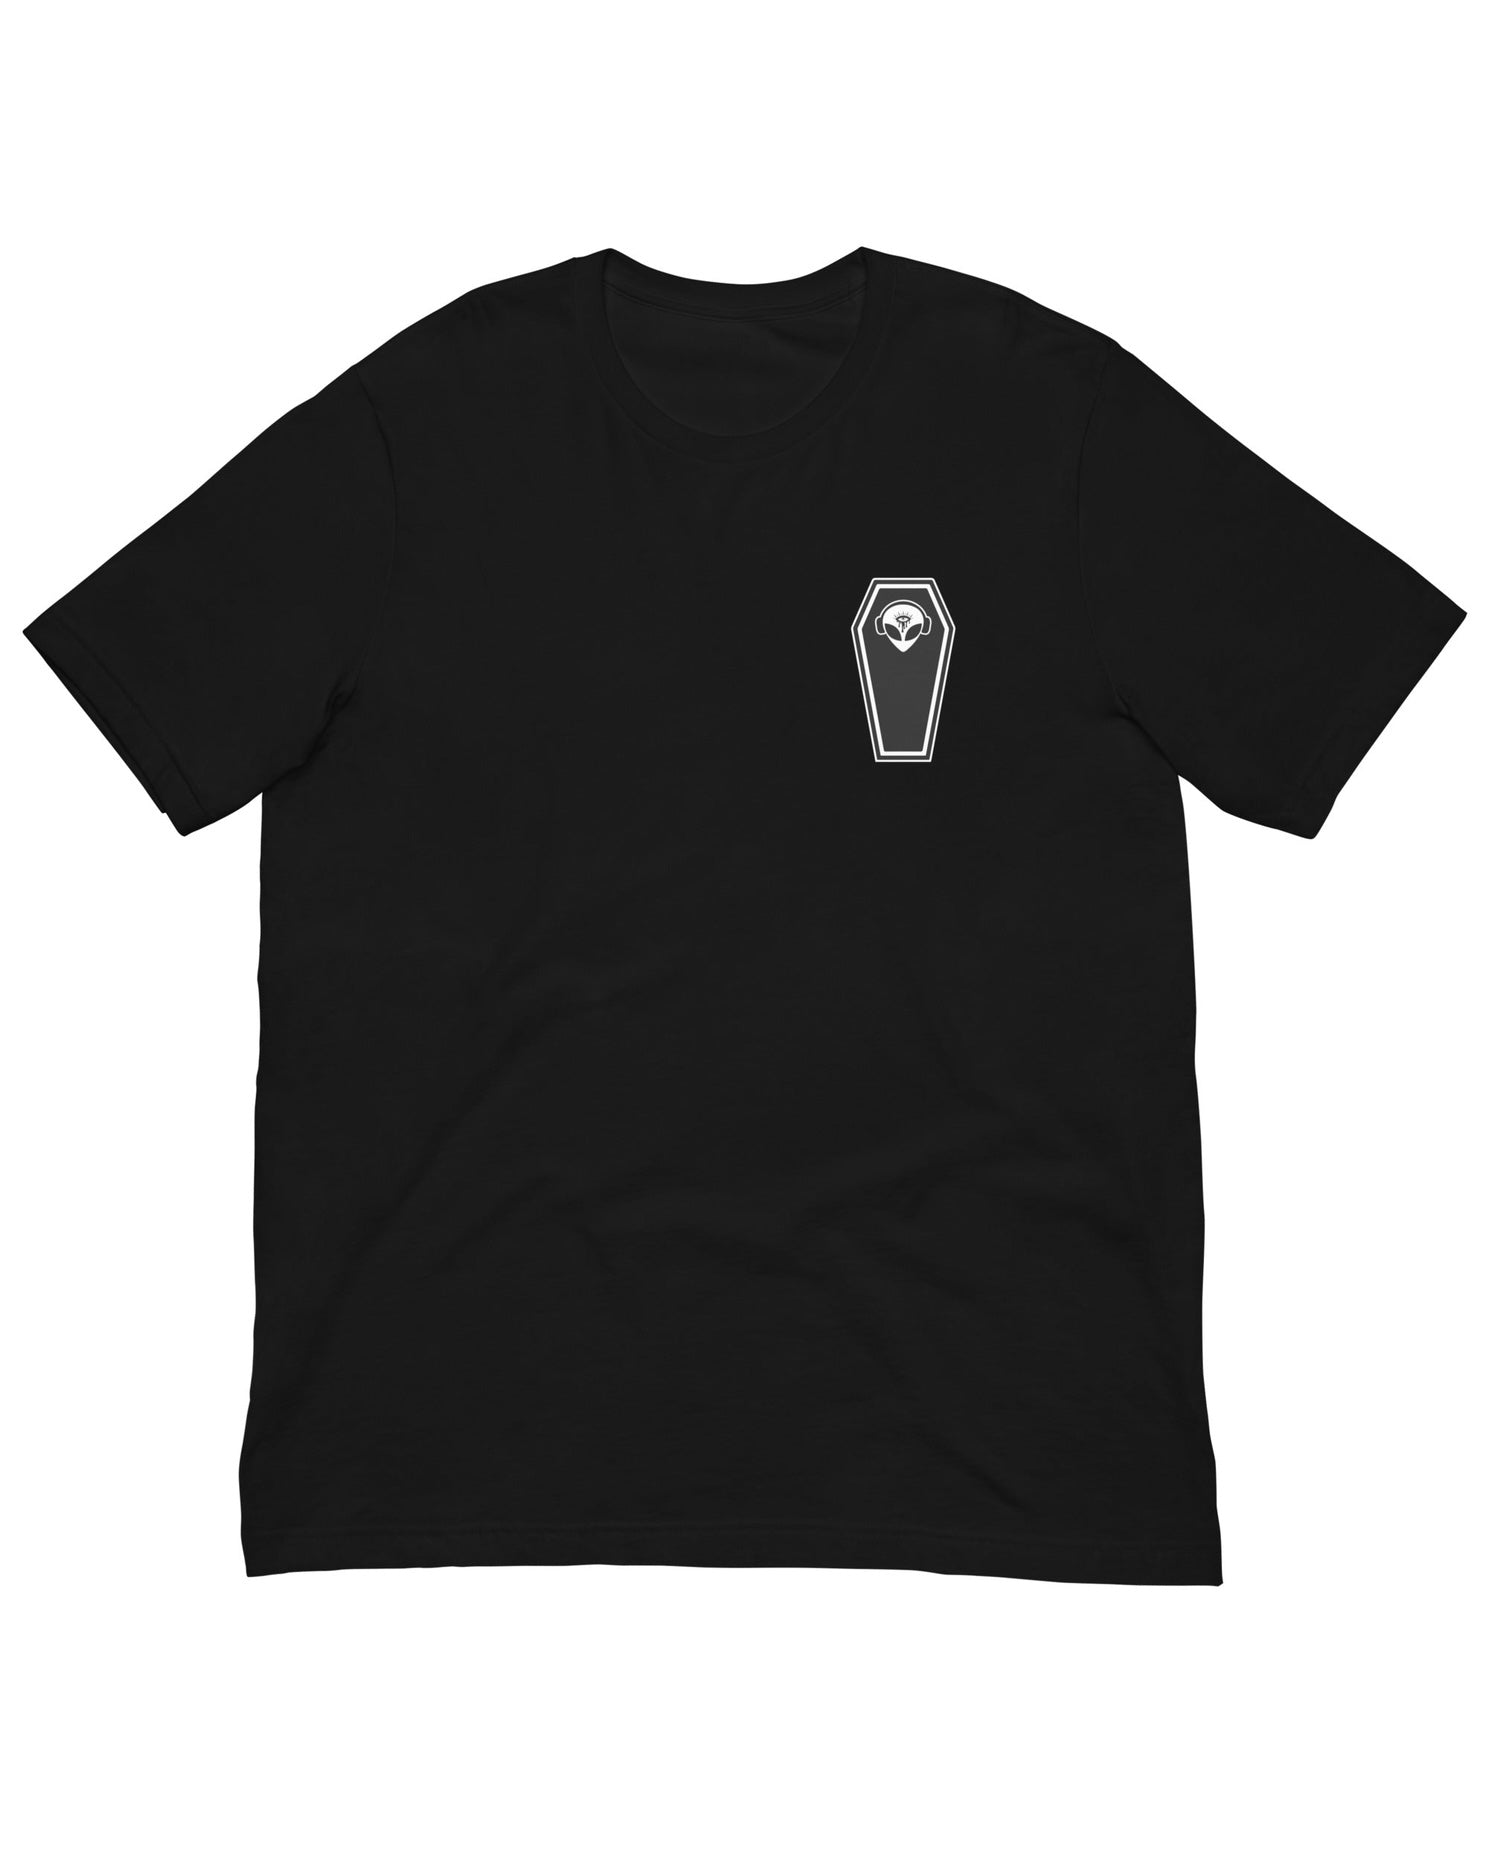 Black t-shirt with an alien head in a coffin over the left chest.